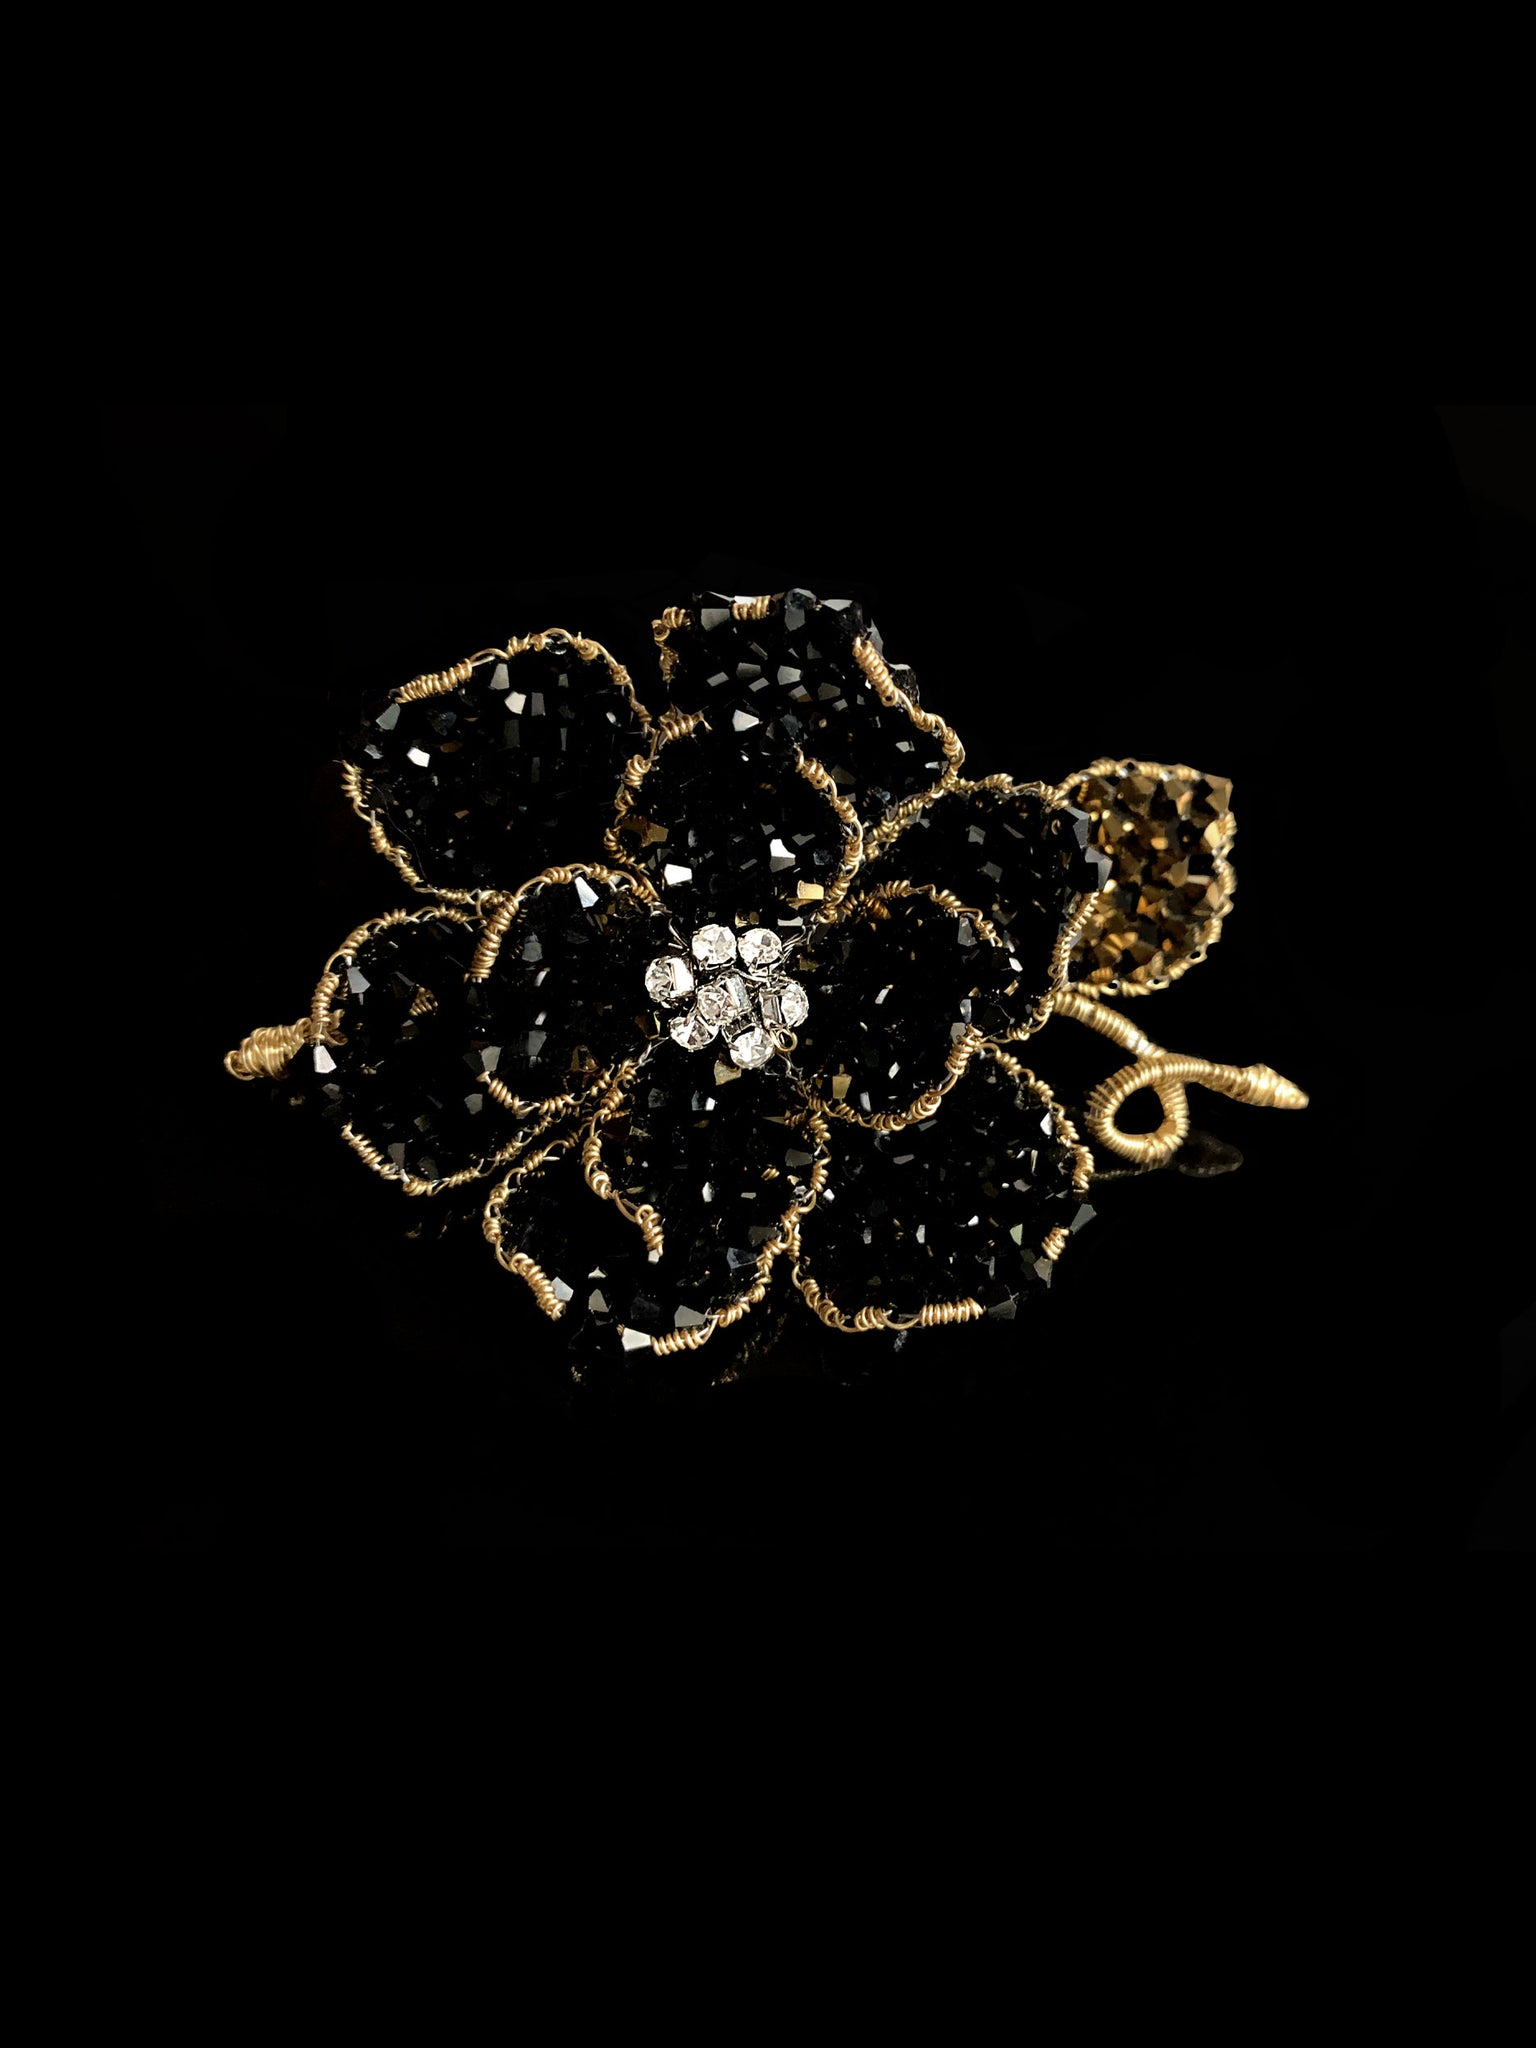 Classic Collection Peony Brooch - Onyx/Gold (Black)